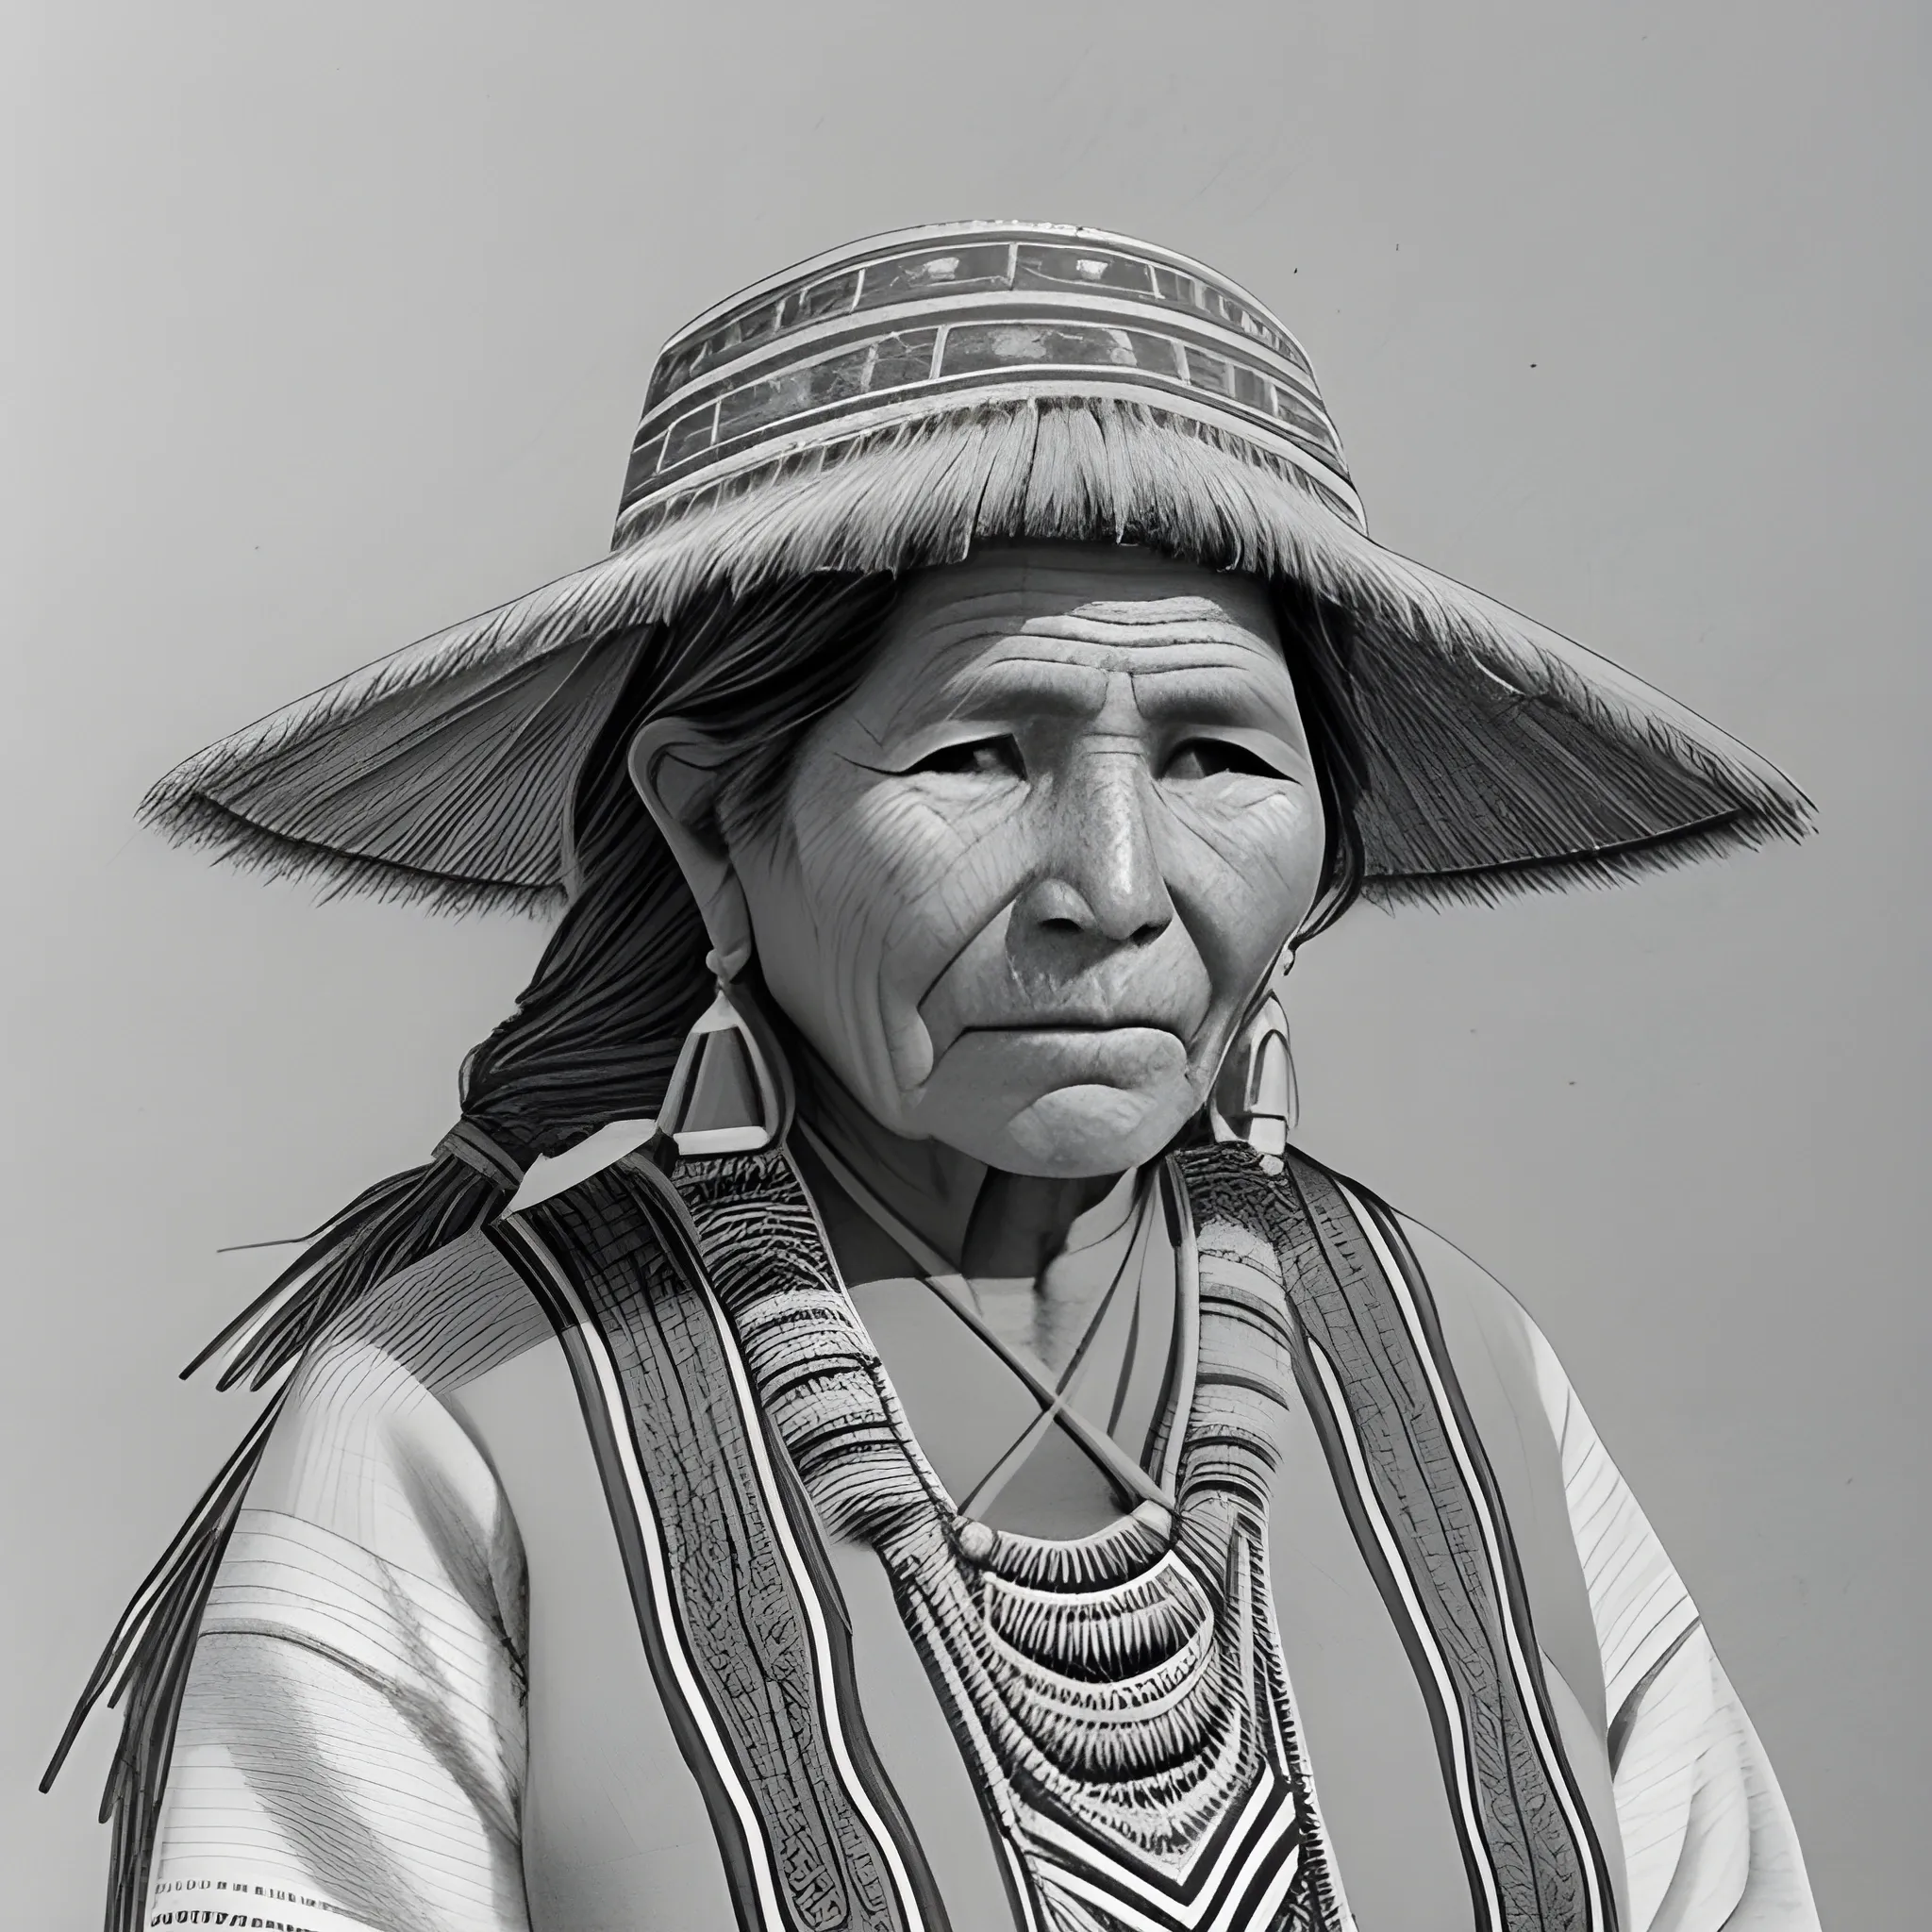  An Andean woman weaver, symbolizing tradition and ancestral resilience., Pencil Sketch